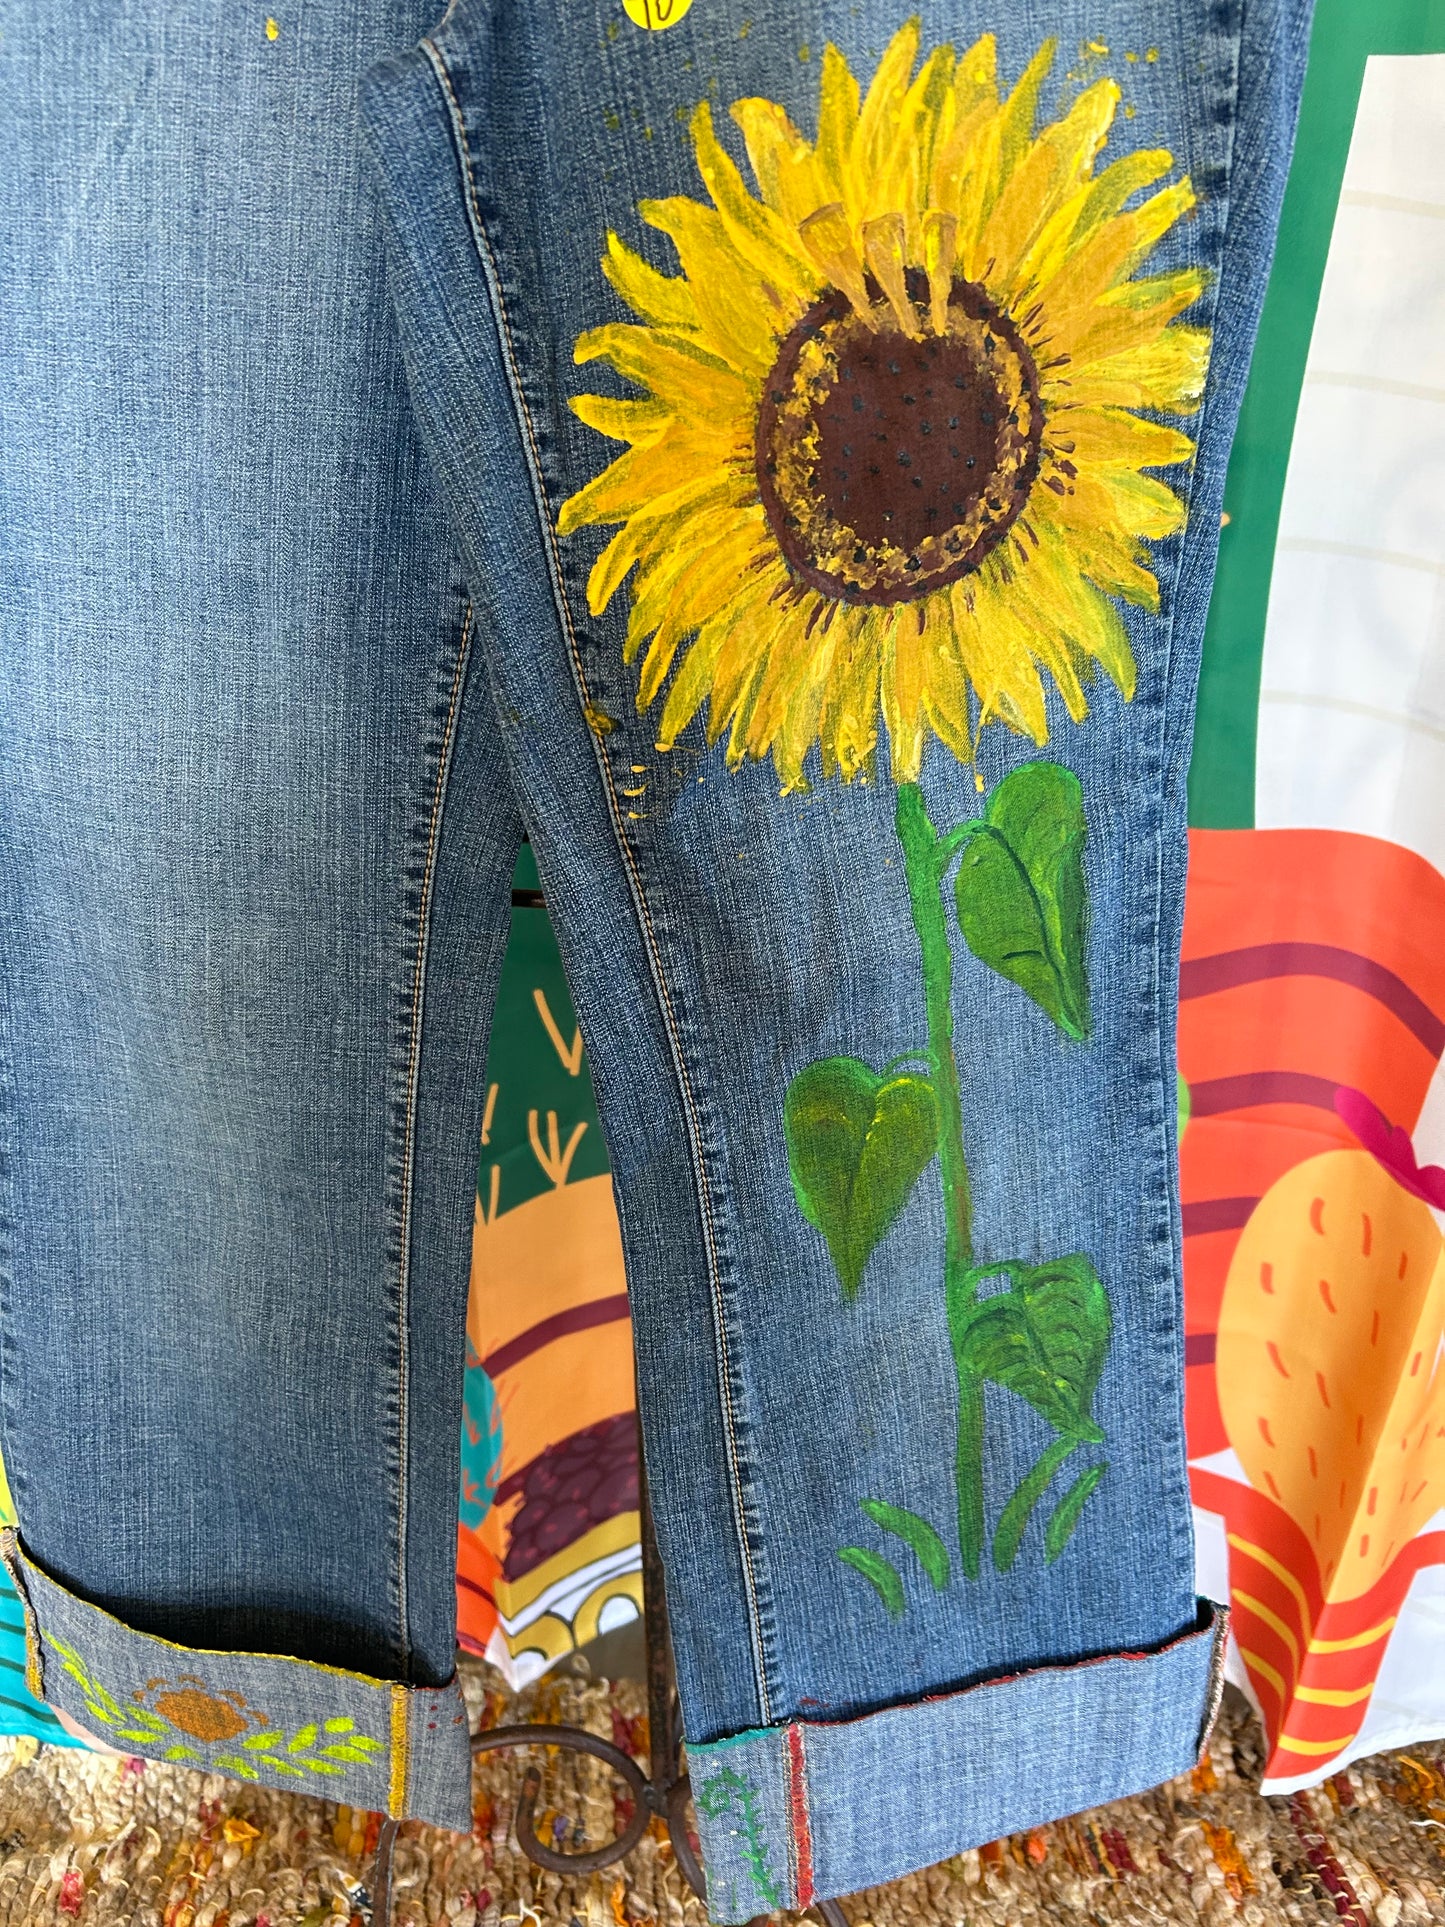 Sunflower Hand Painted Jeans